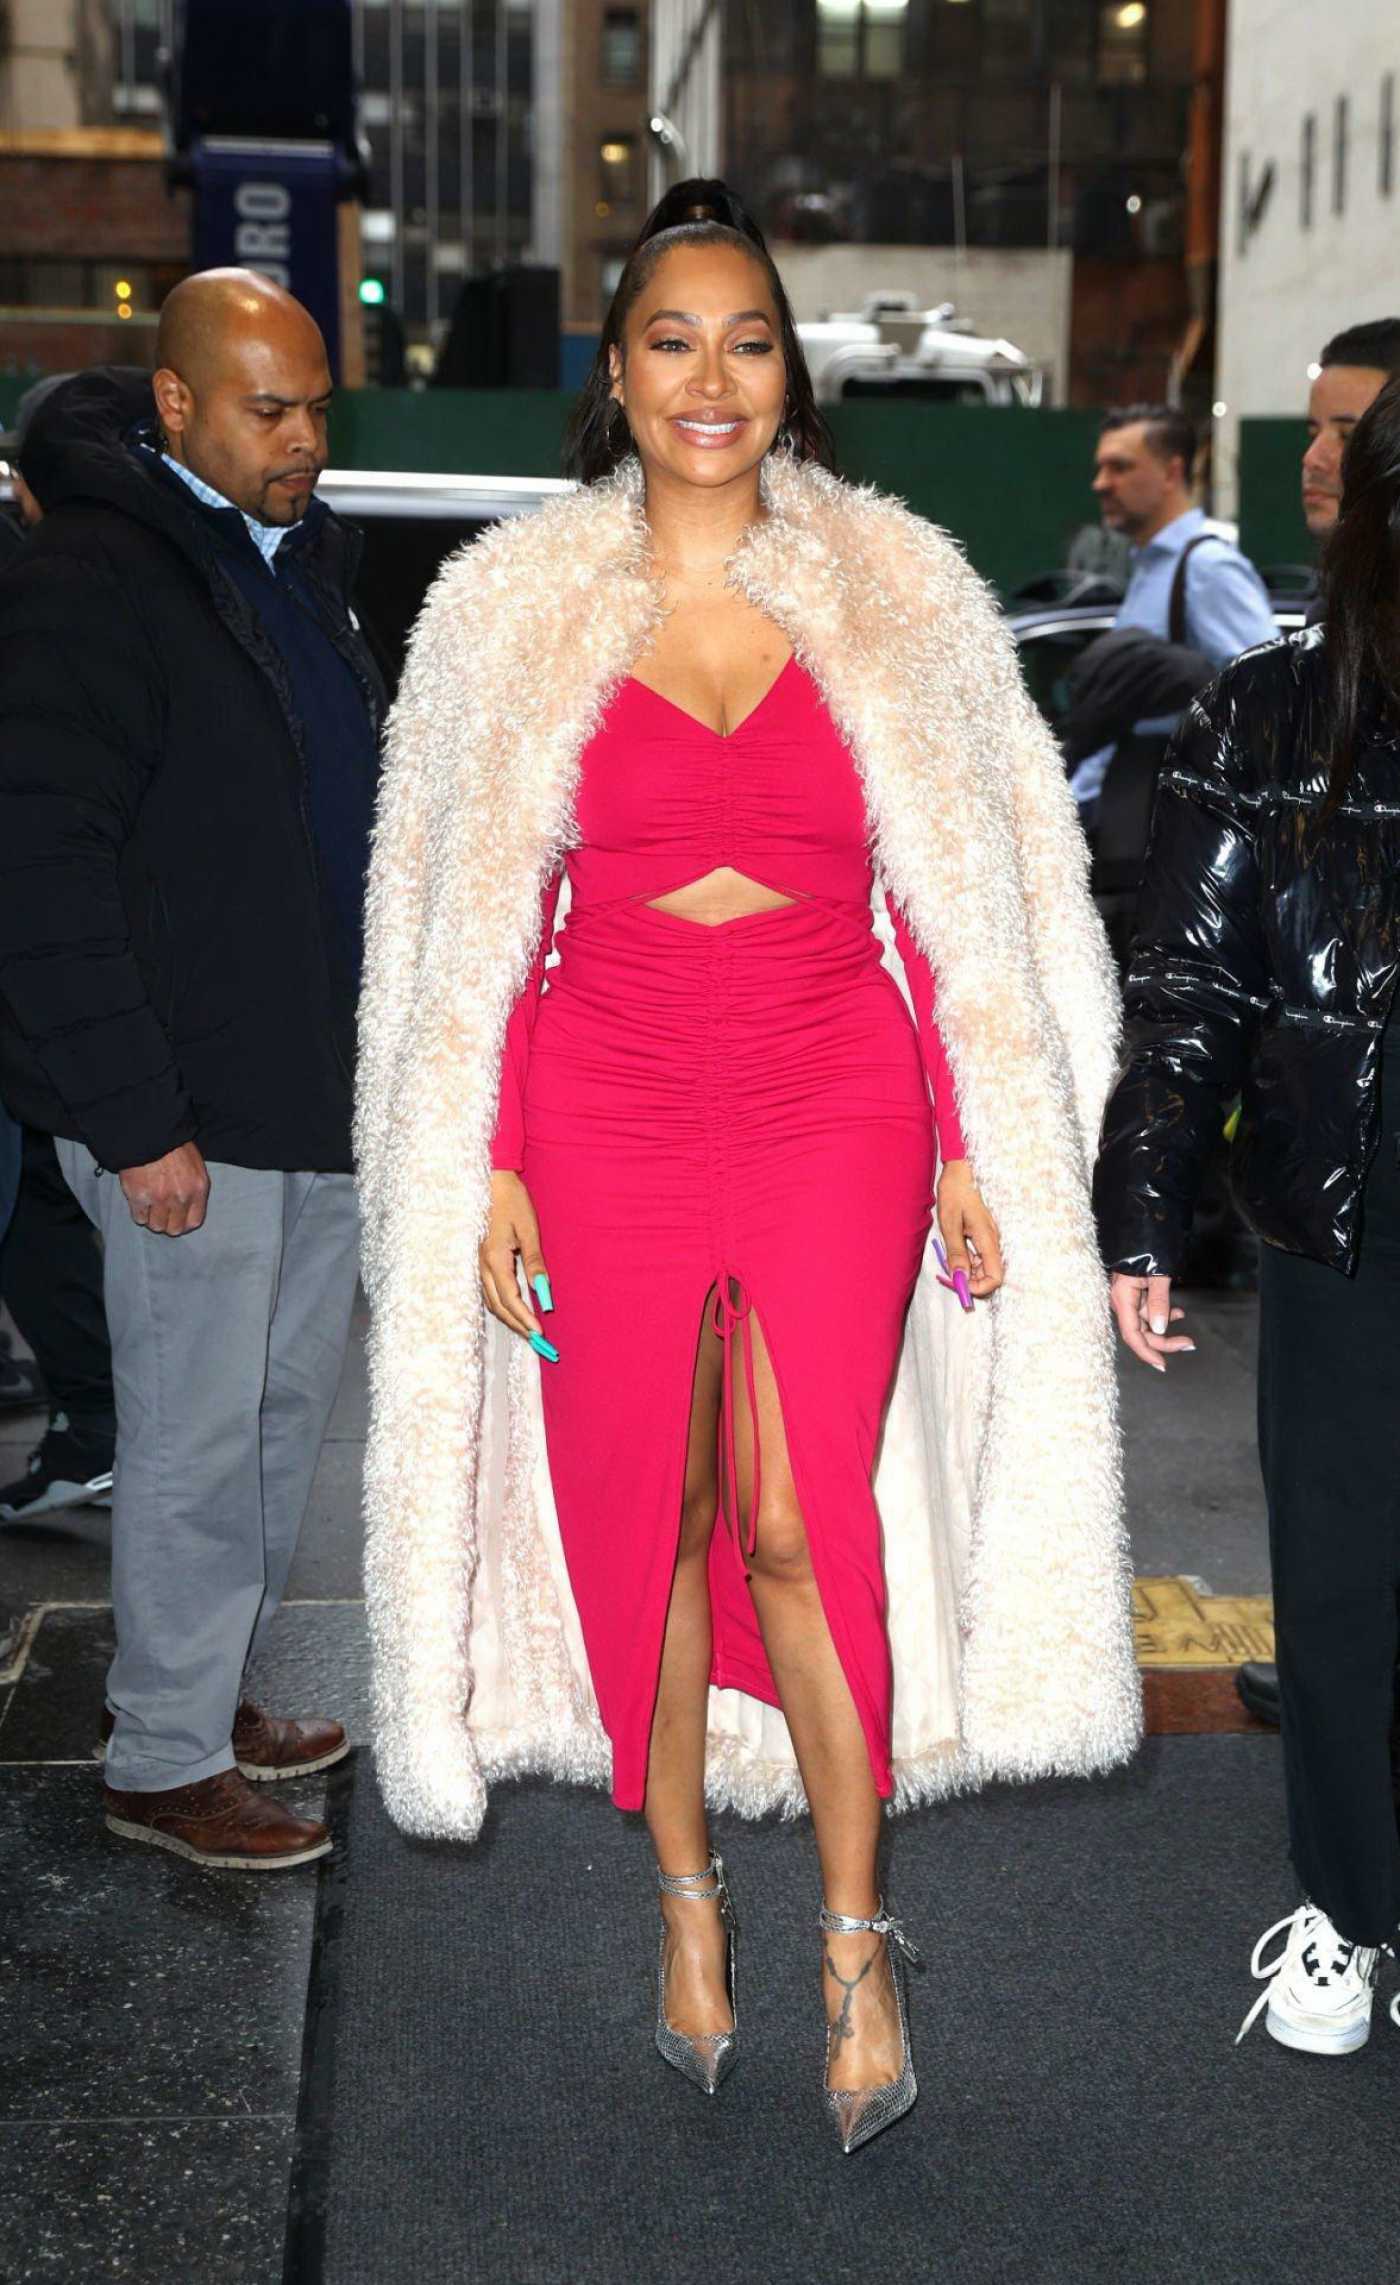 La La Anthony in a Pink Dress Arrives at the NBC Studios in New York City 01/13/2023